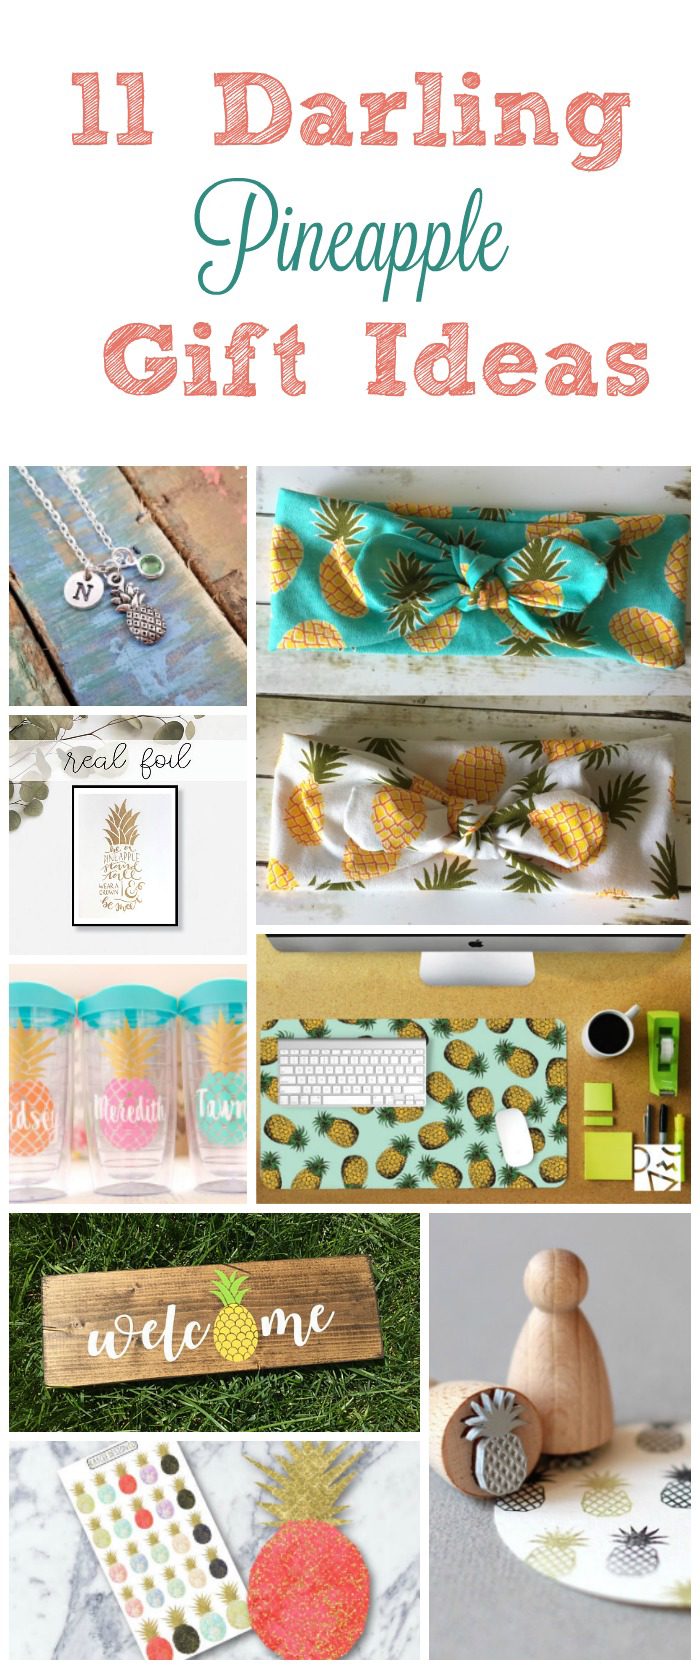 Love pineapples? Like REALLY love them? Why not show off your adoration with some of these insanely cute pineapple gift ideas on Etsy?